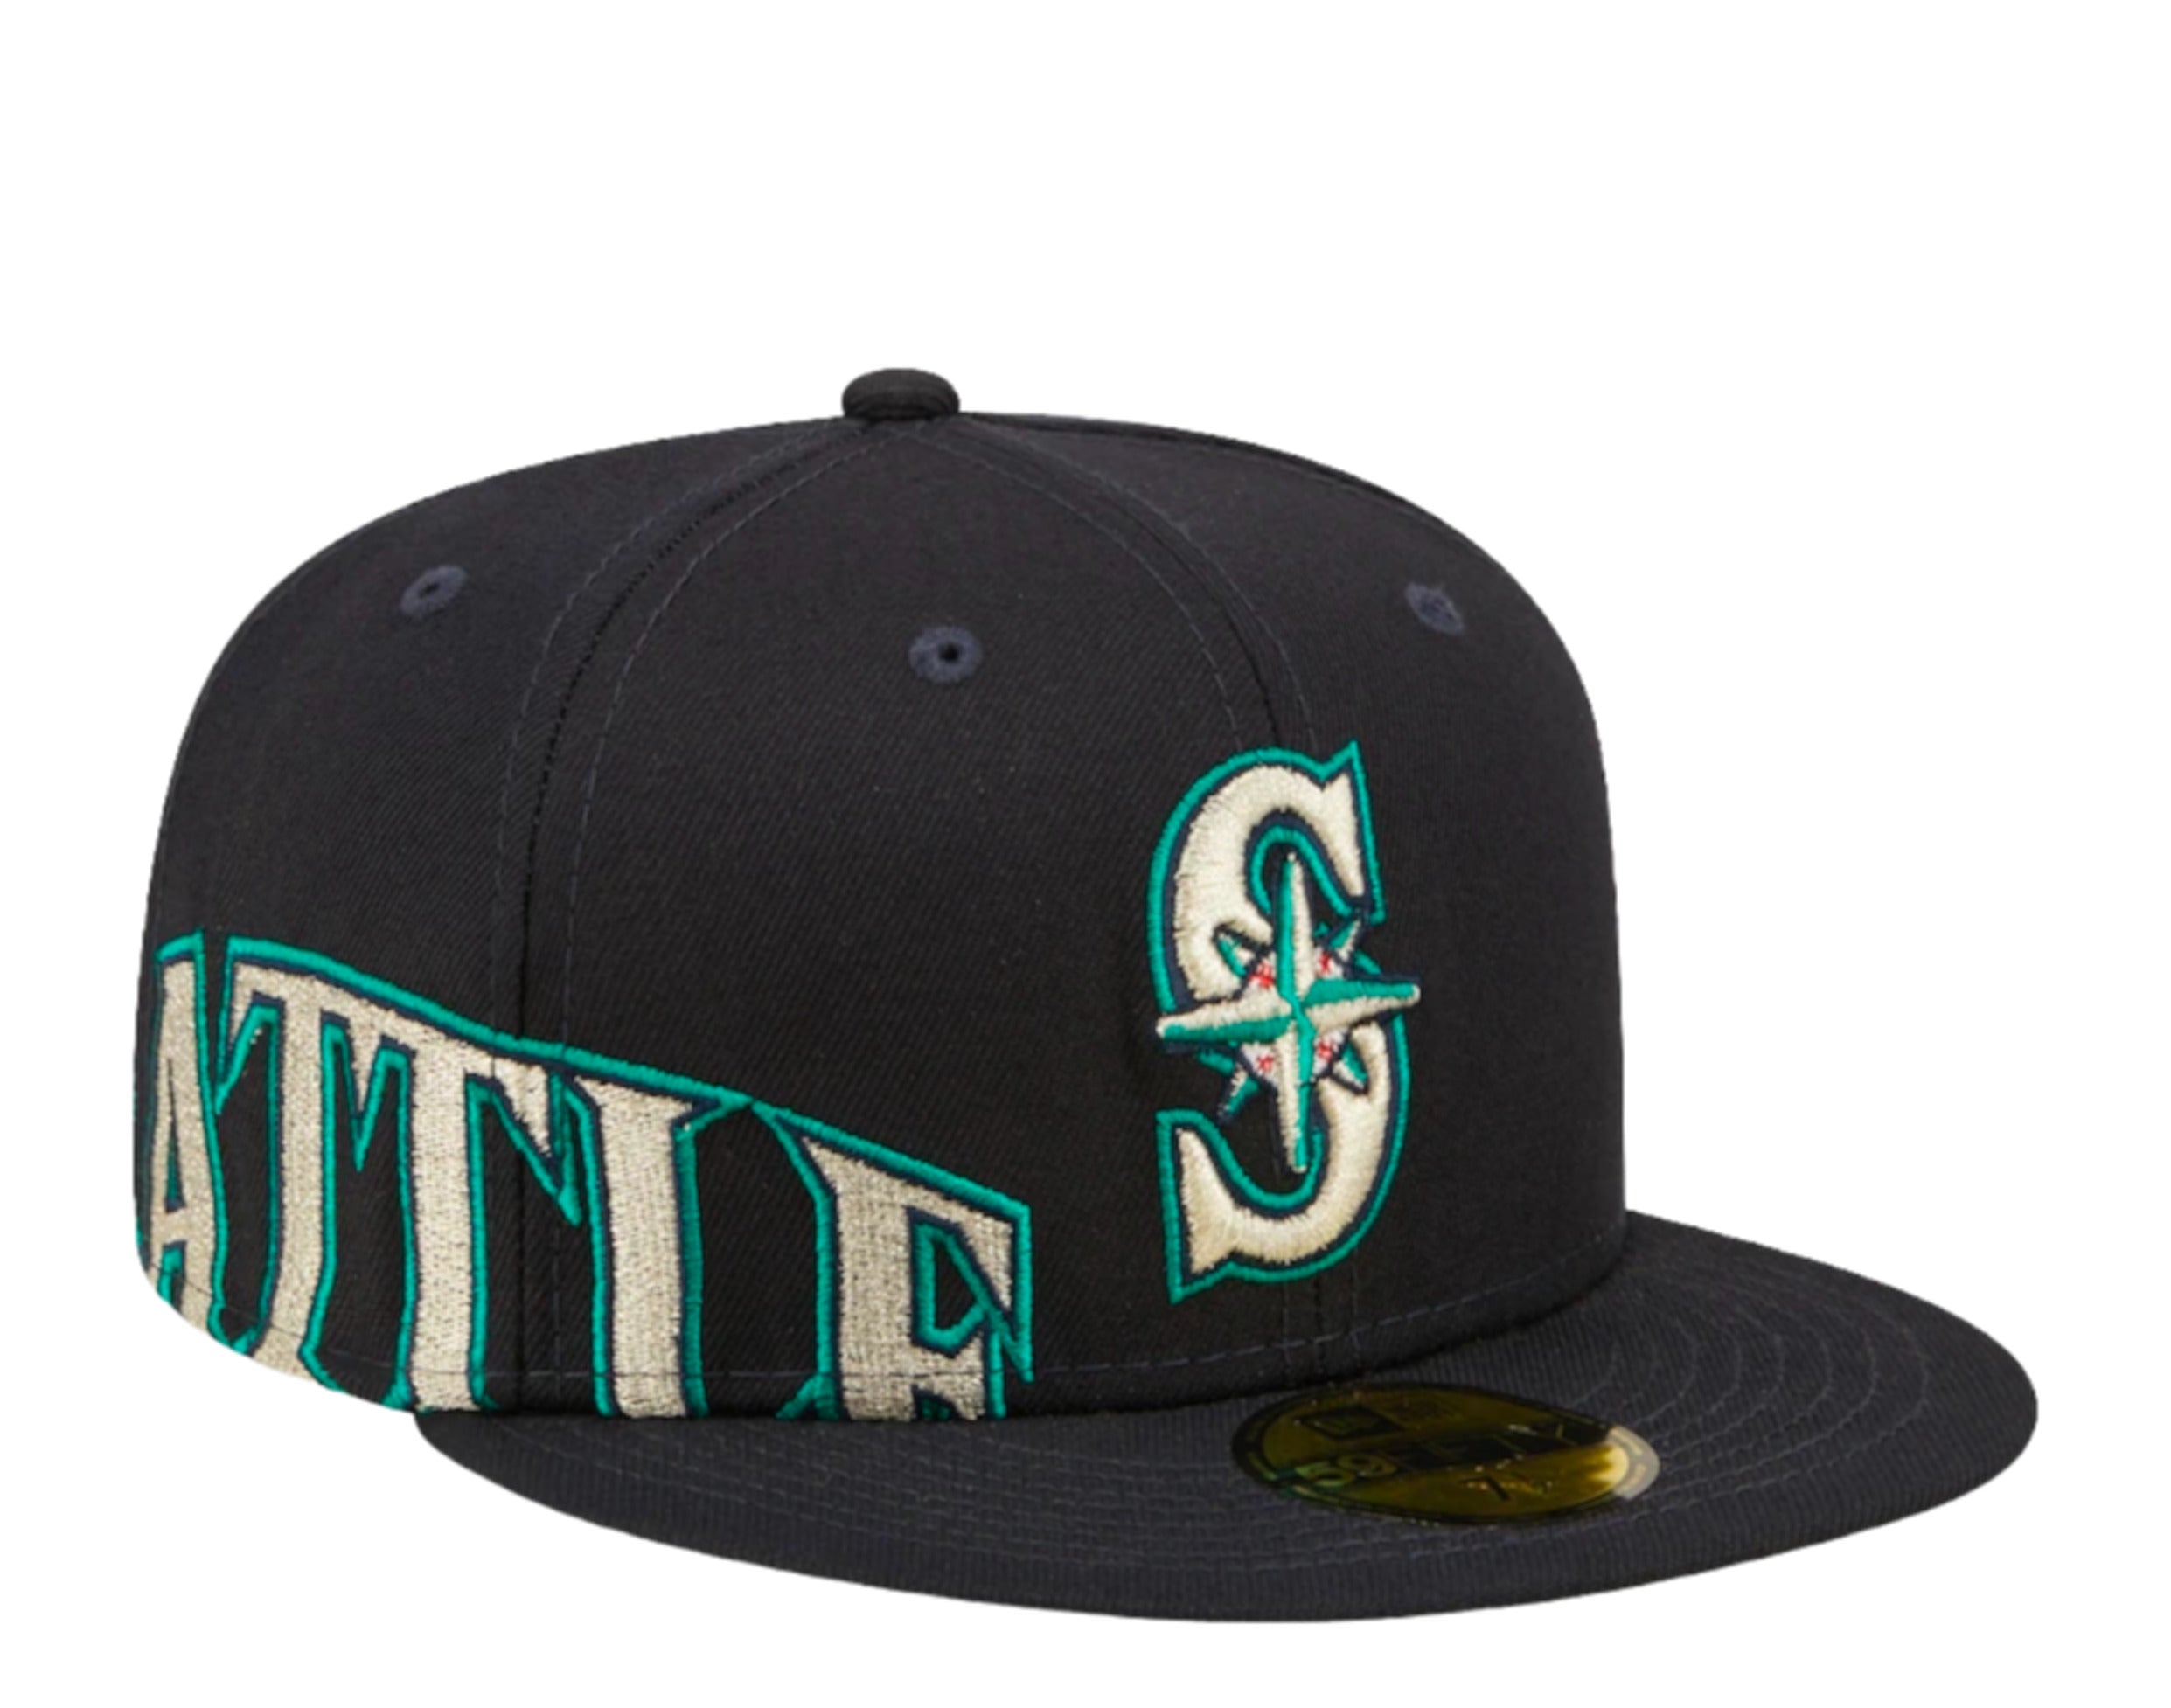 Seattle Mariners CITY CONNECT ONFIELD Hat by New Era